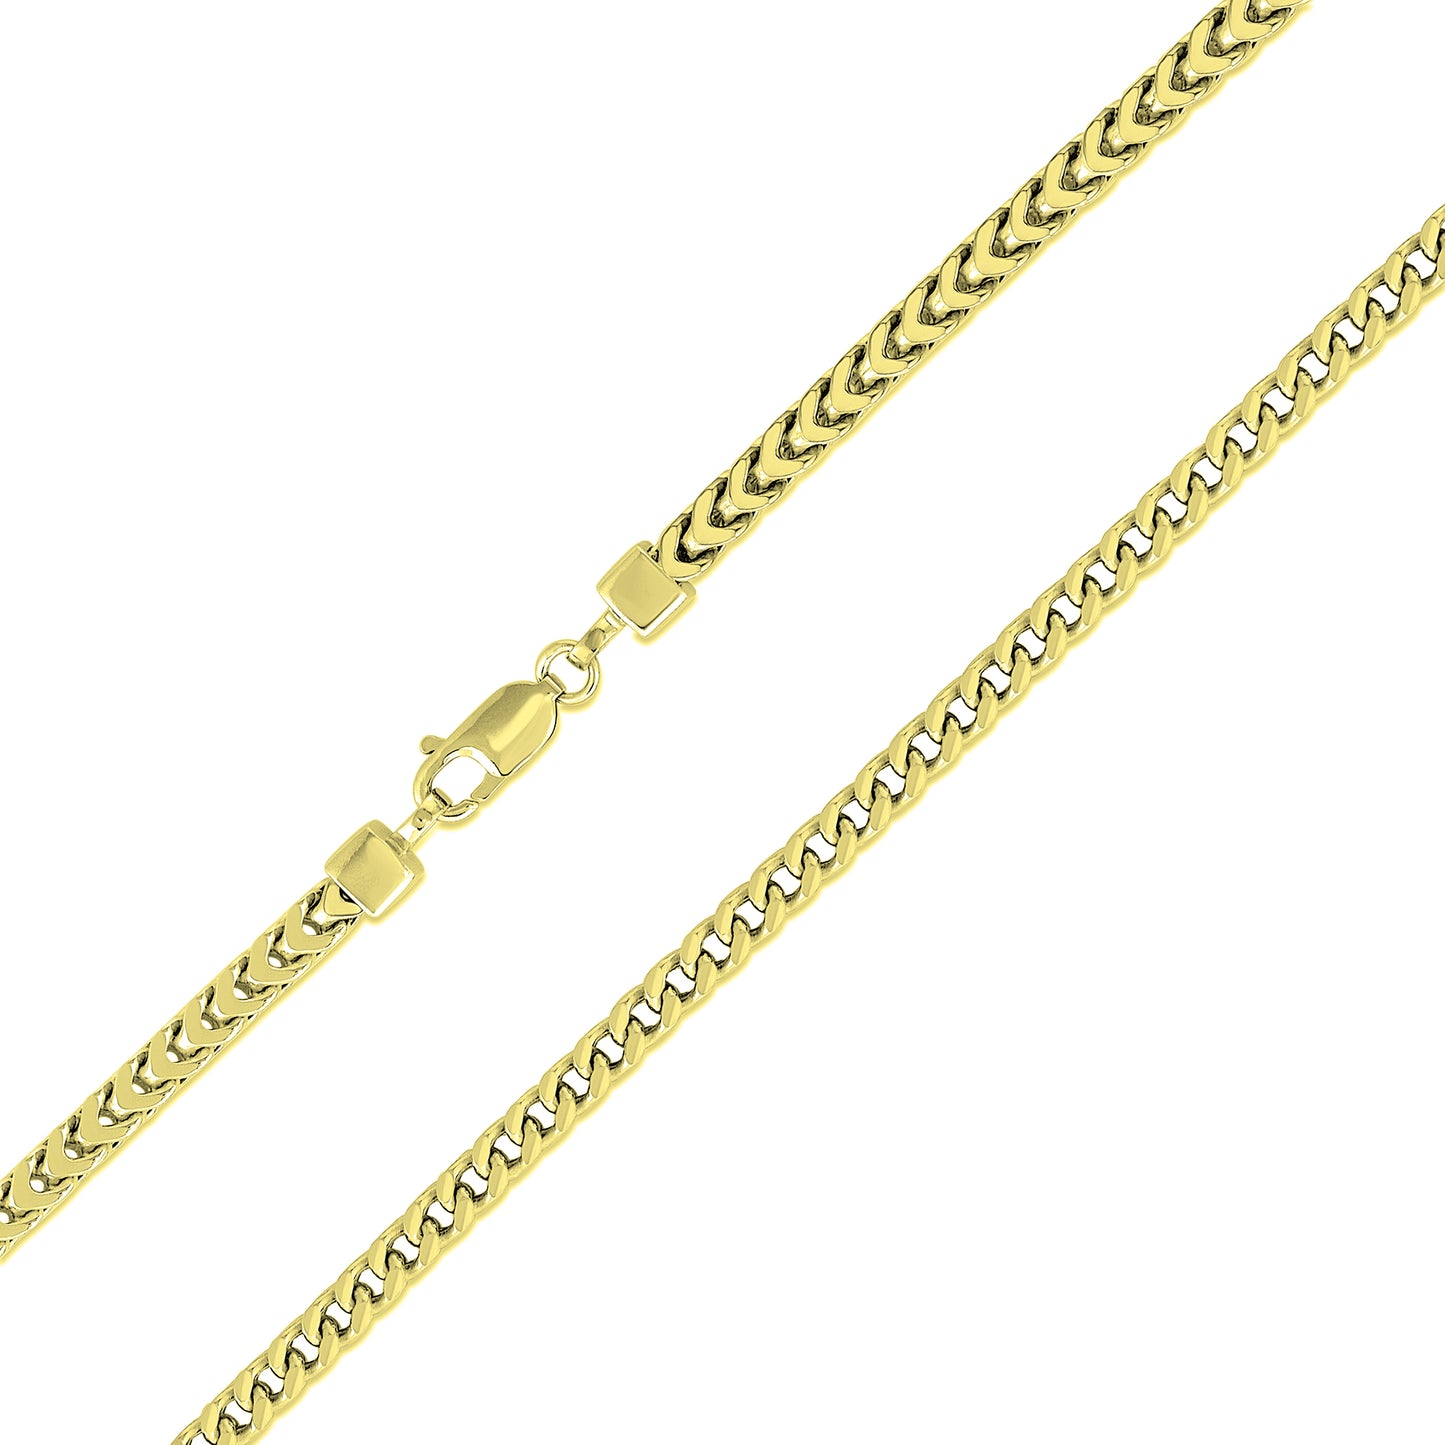 Silver 925 Gold Plated Franco 180 Chain. FRANCO180G